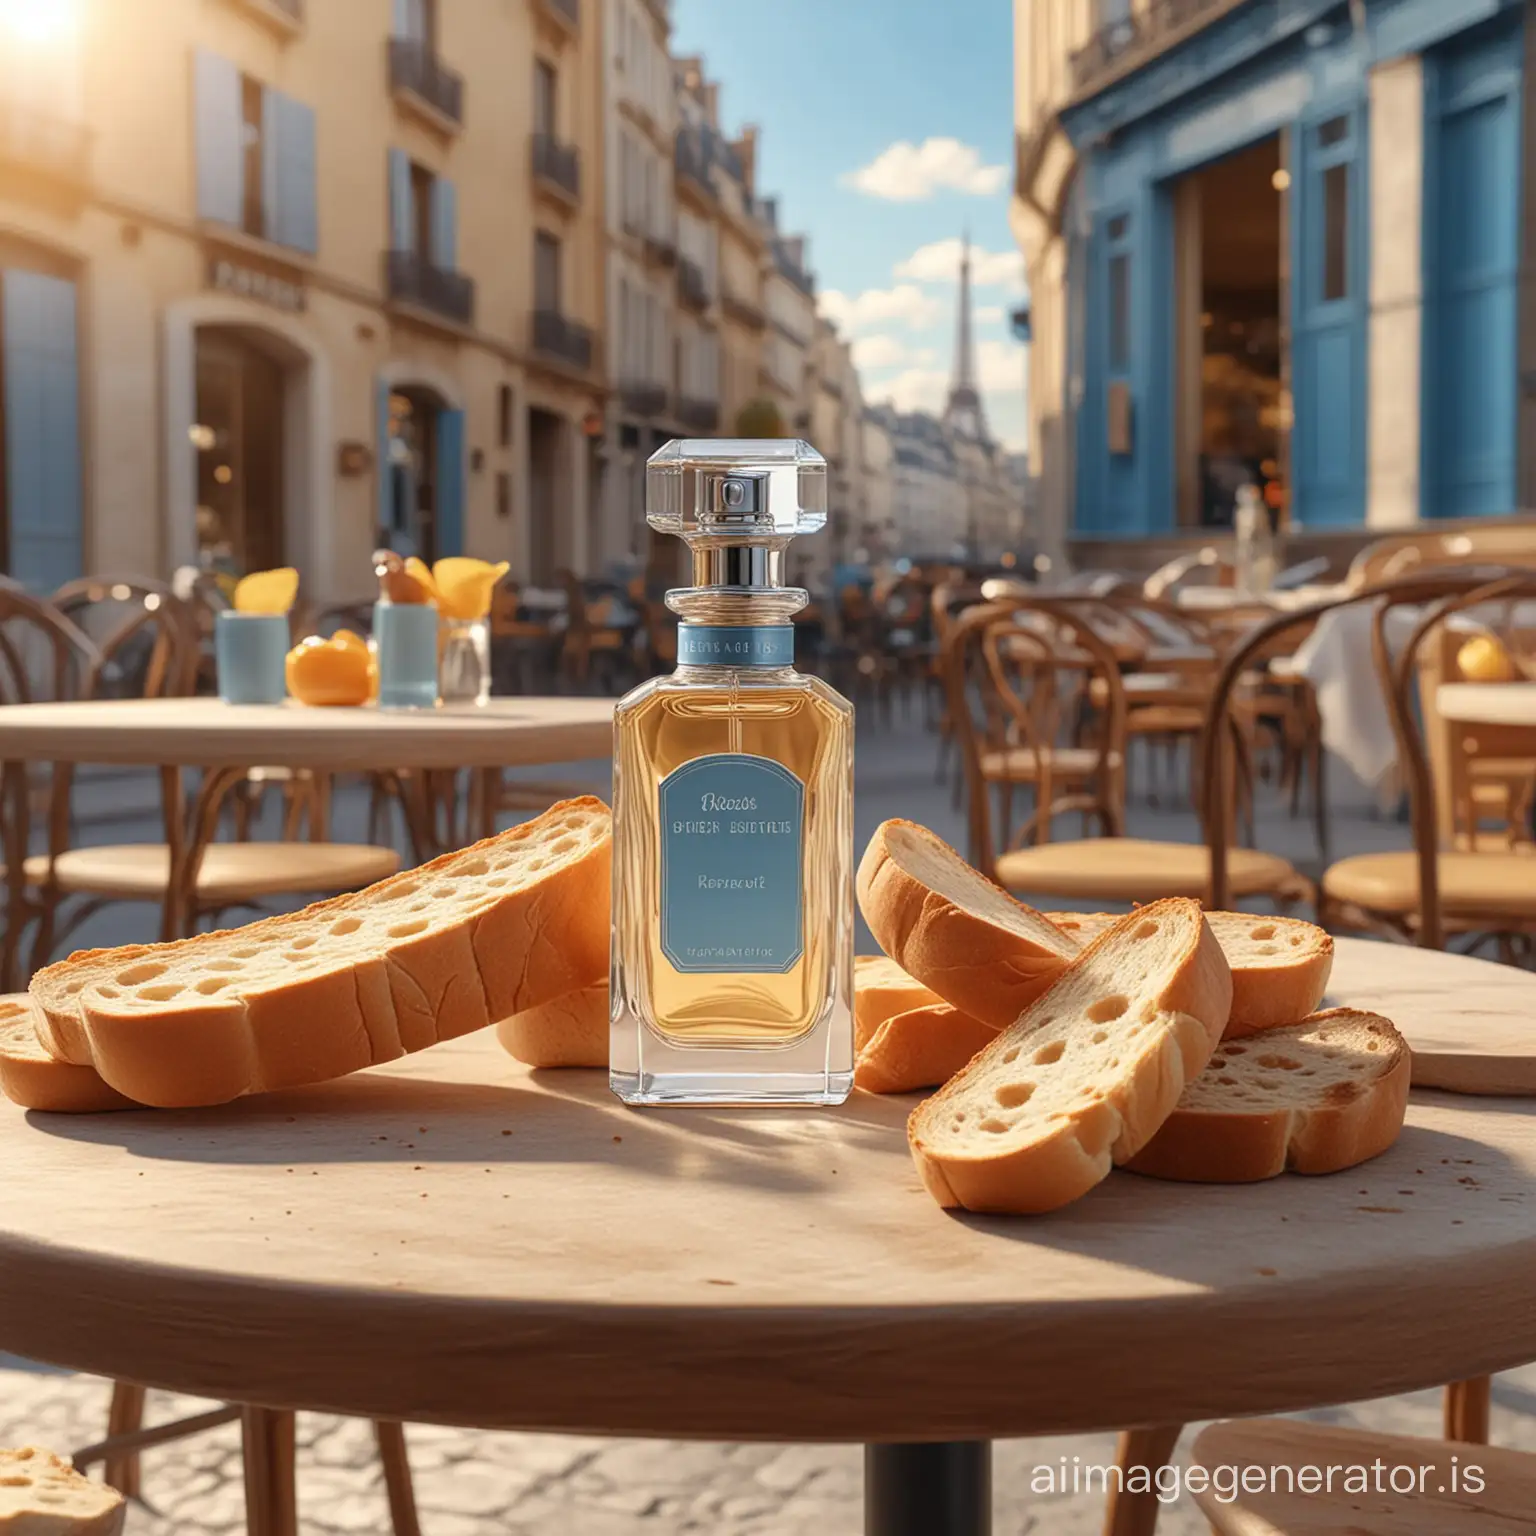 a hyper-realistic 3d rendering of a perfume product on a table, surrounded by baguette bread, paris bread background of chairs and tables in a cafe in a warm daytime atmosphere blue orange sky.